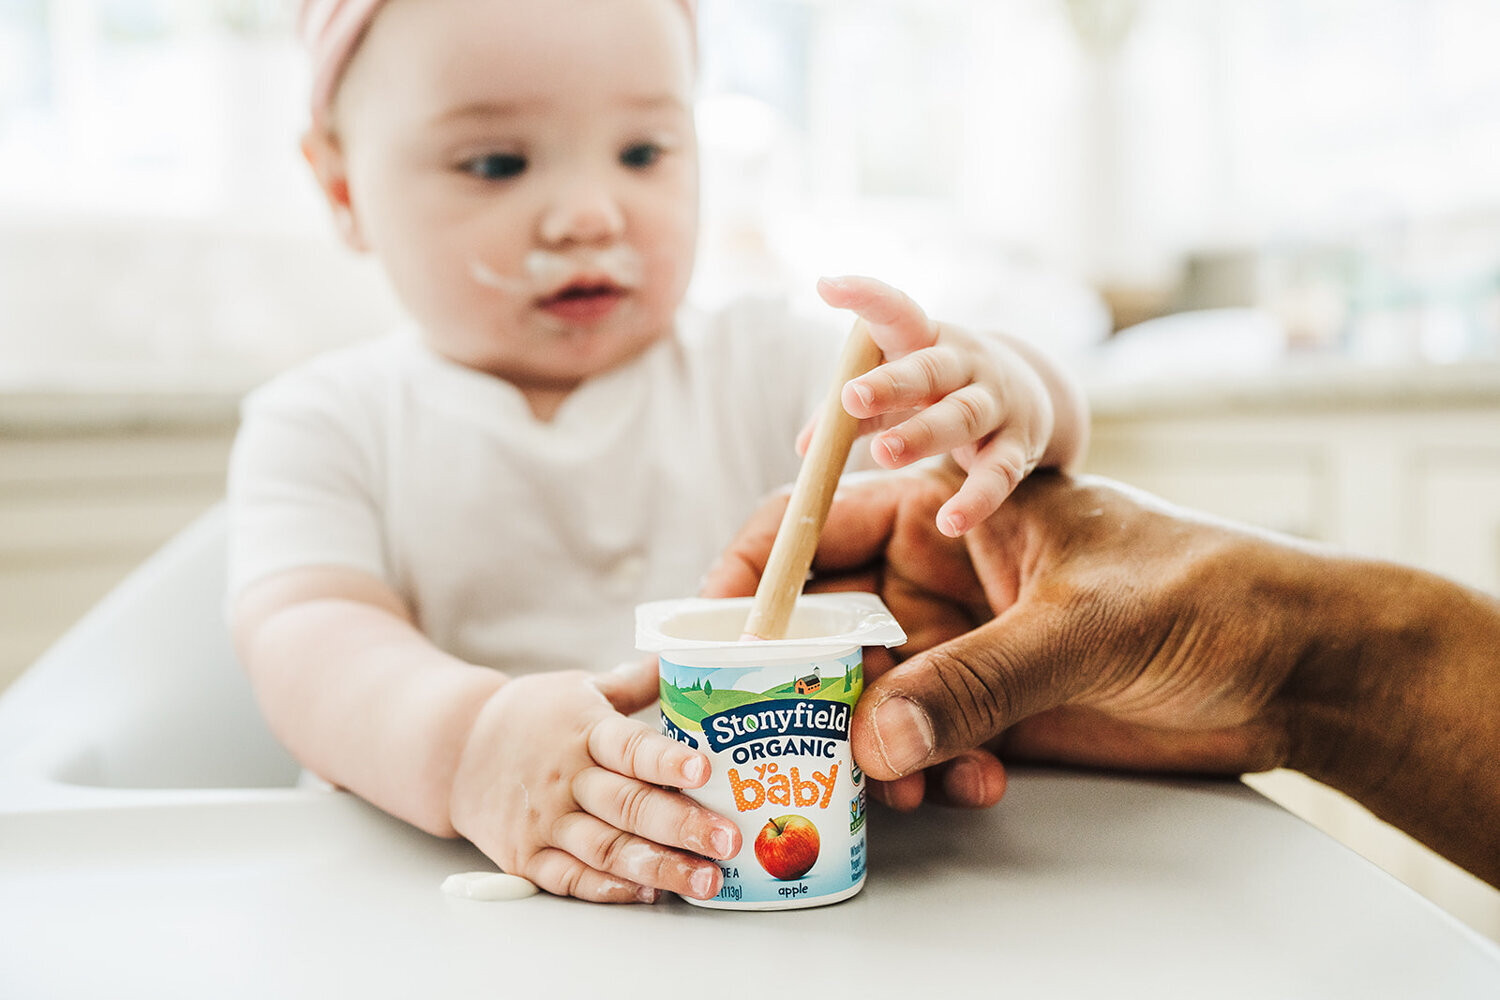 baby dips spoon into yogurt cup for commercial photo shoot